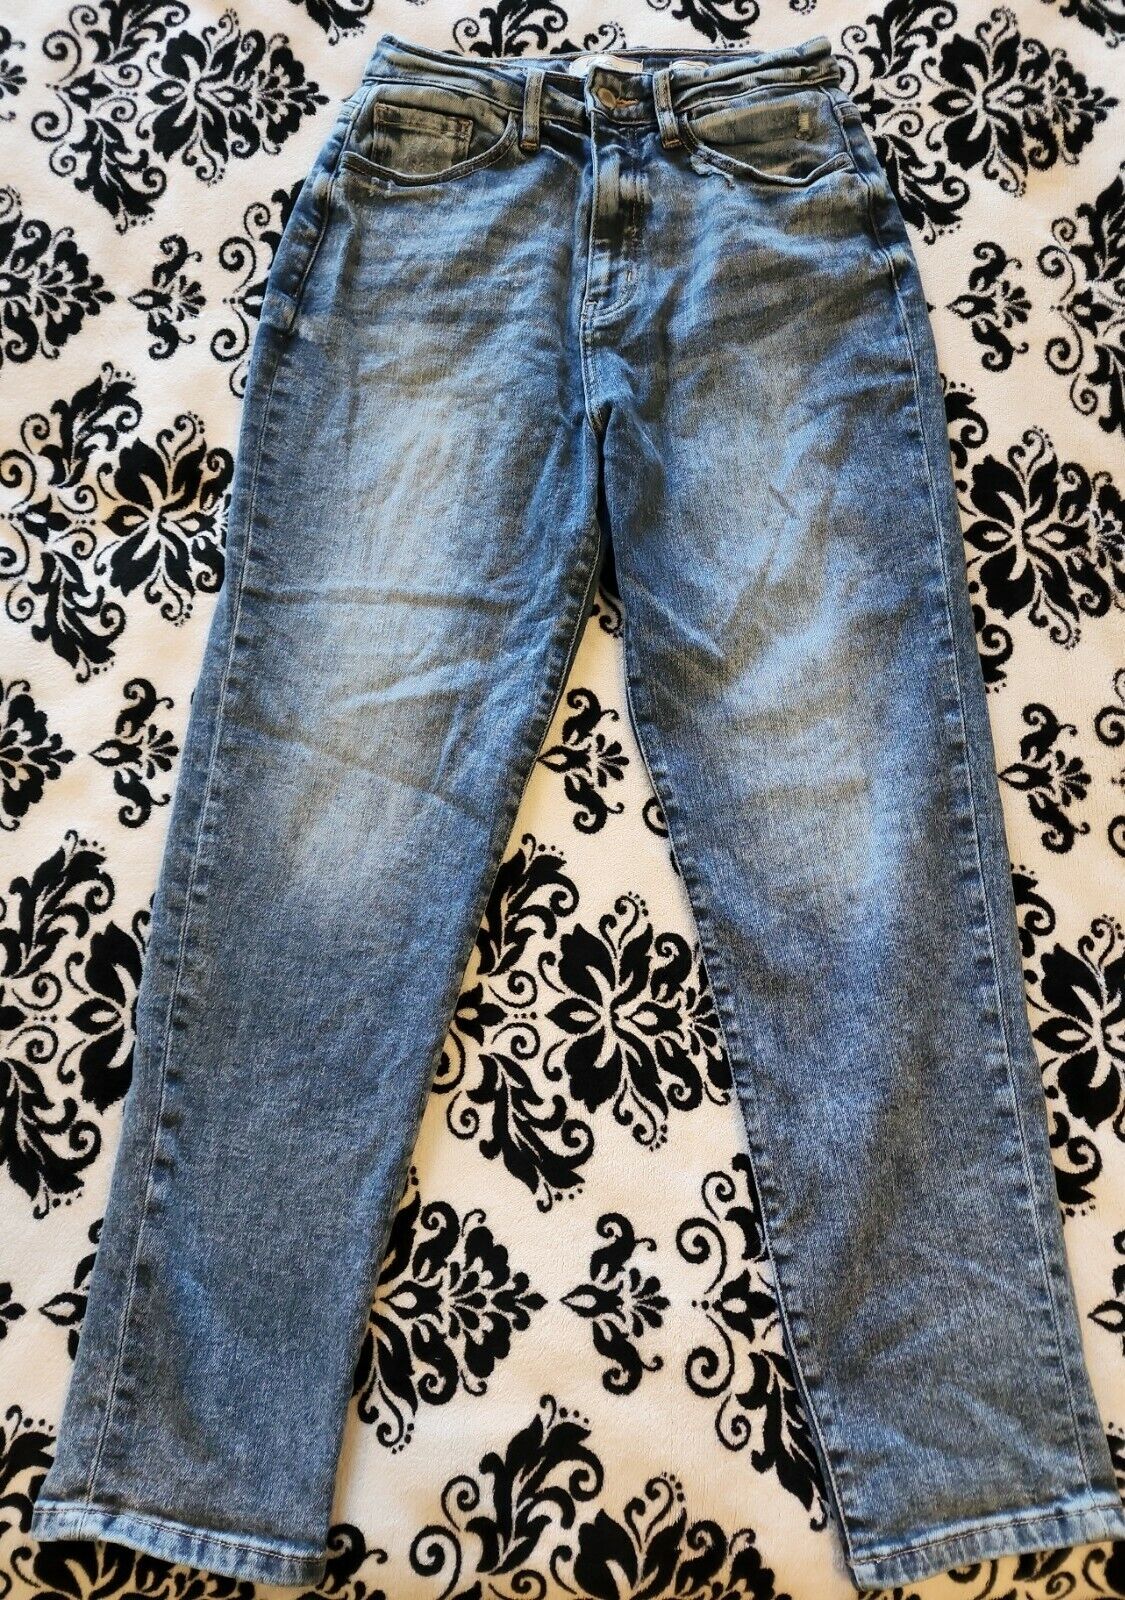 KanCan Ultra High Rise Baggy Fit Distressed Jeans Women's size 2